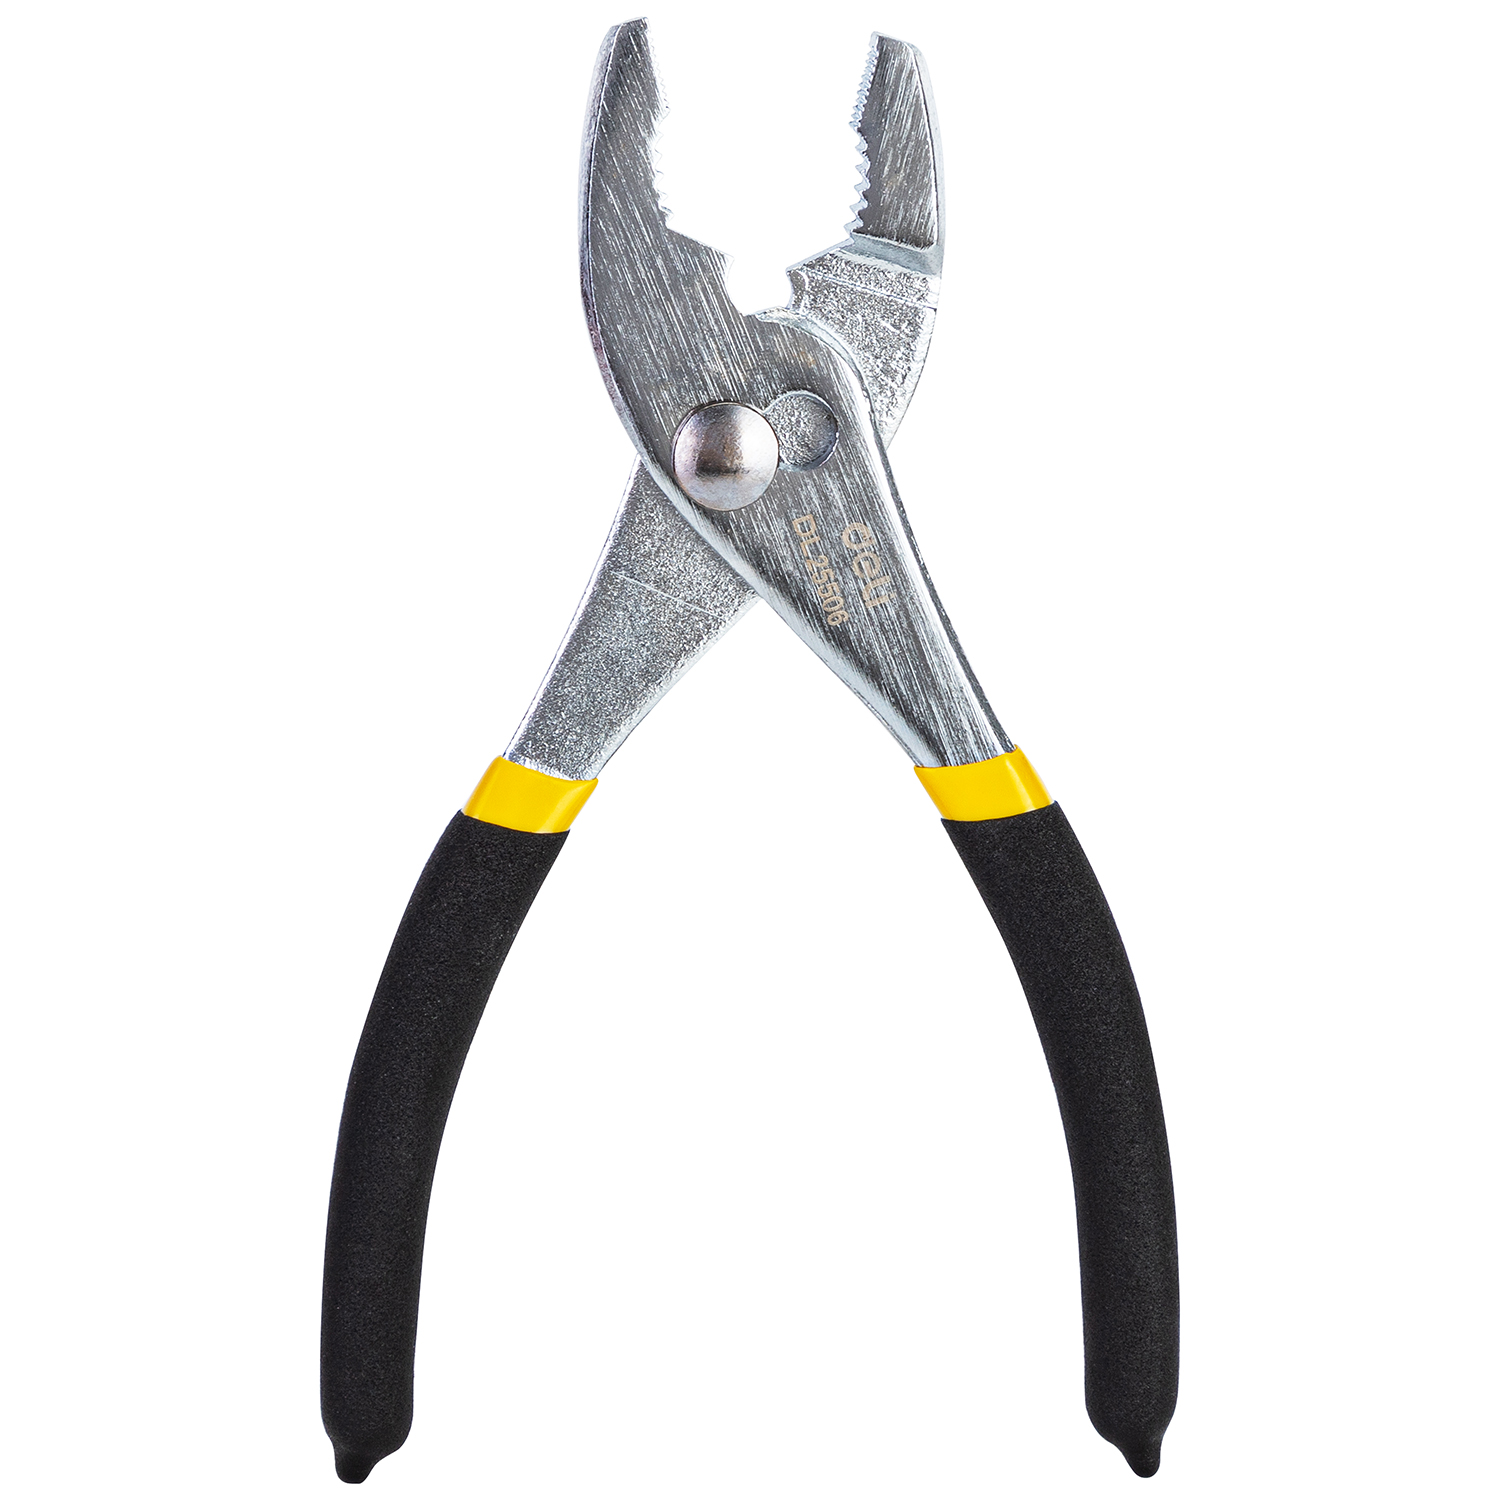 Precision slip-joint Other Plier for hose clamps